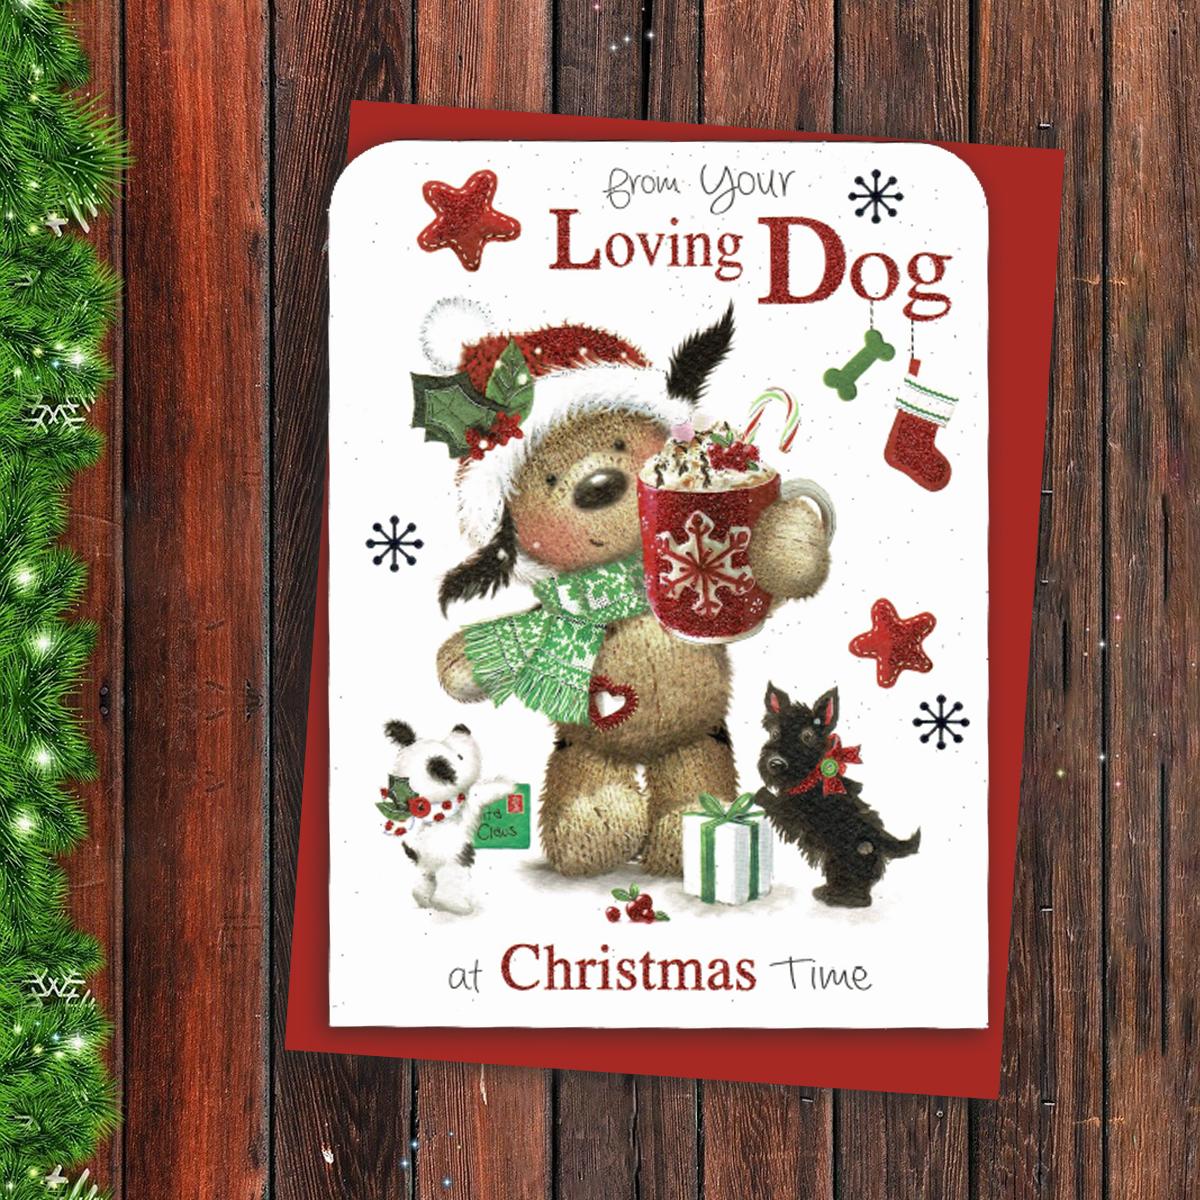 From The Dog Christmas Card Alongside Its Red Envelope